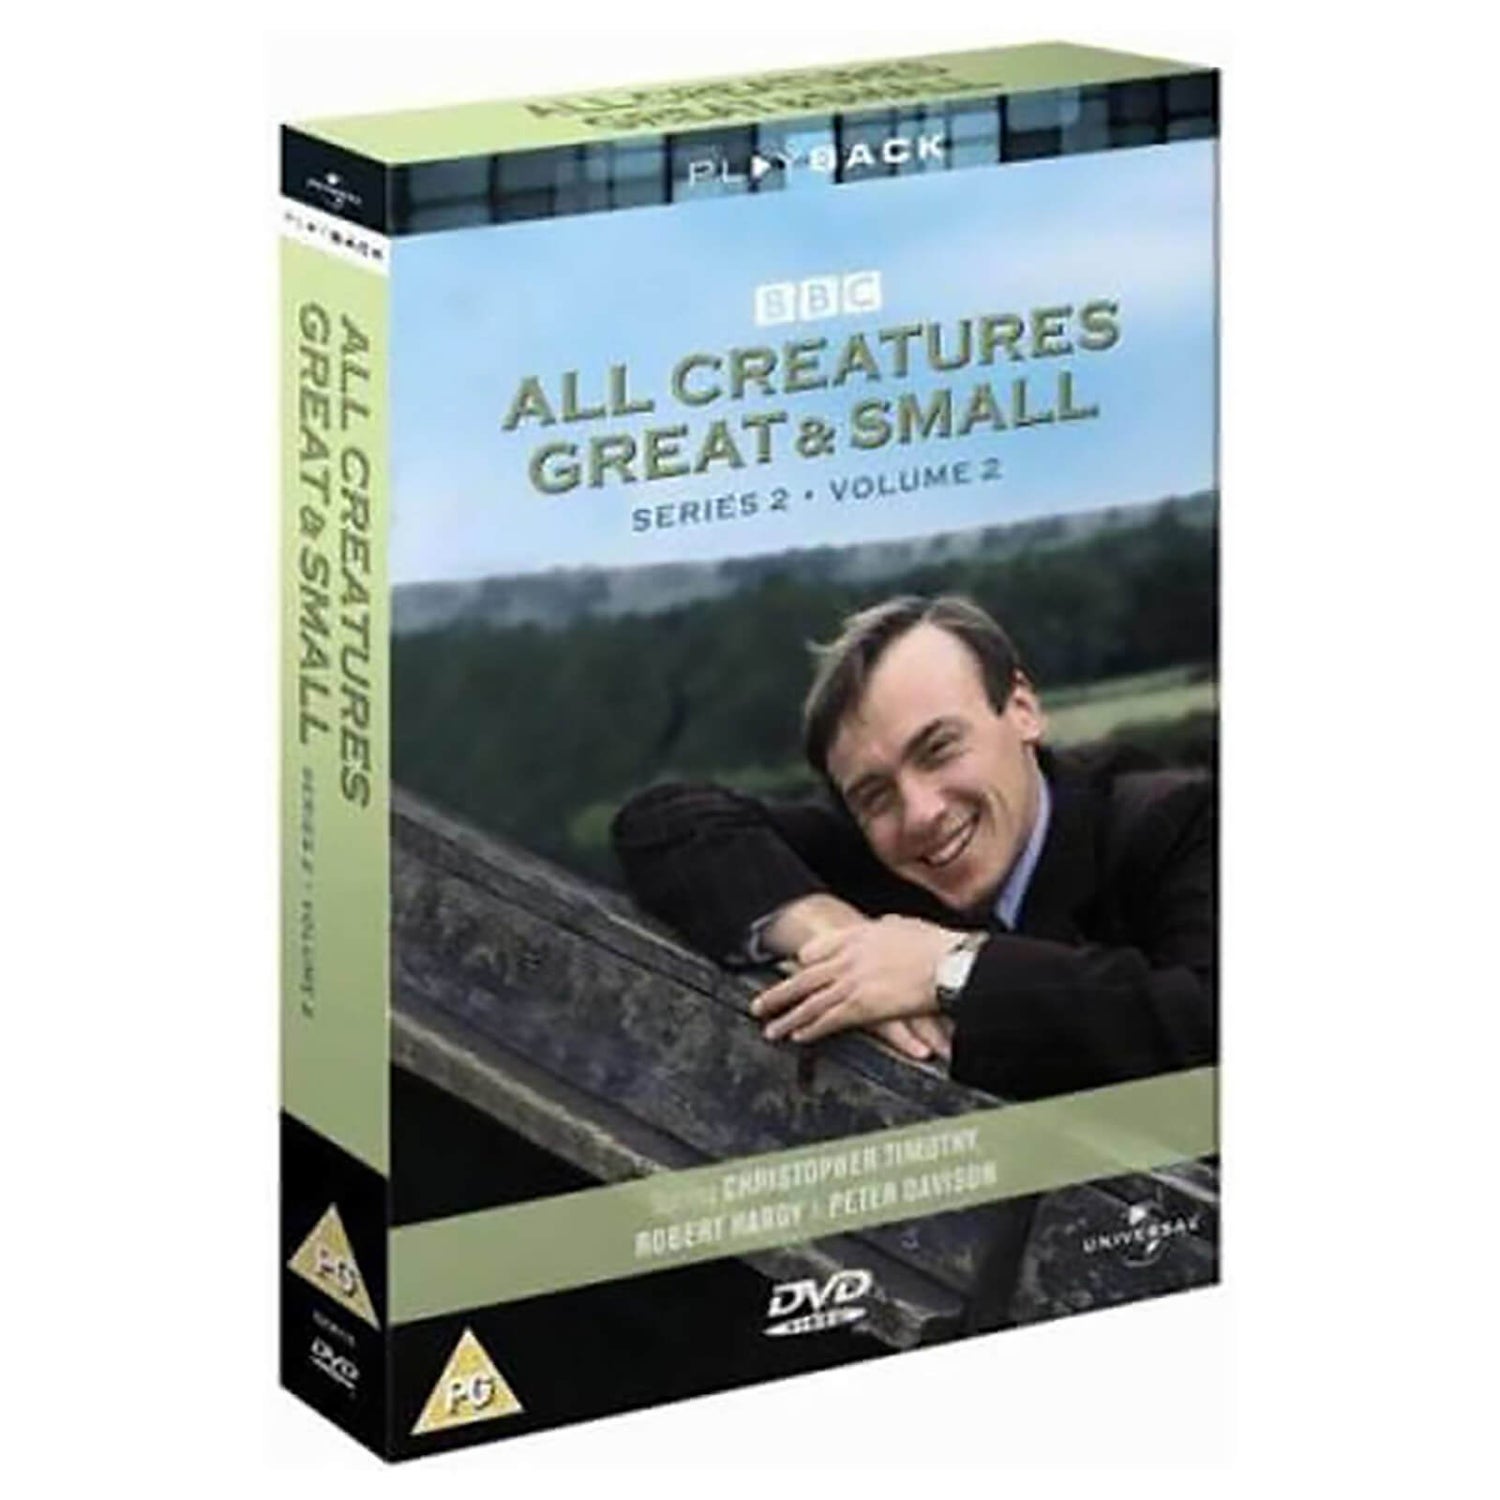 All Creatures Great And Small - Series 2 Volume 2